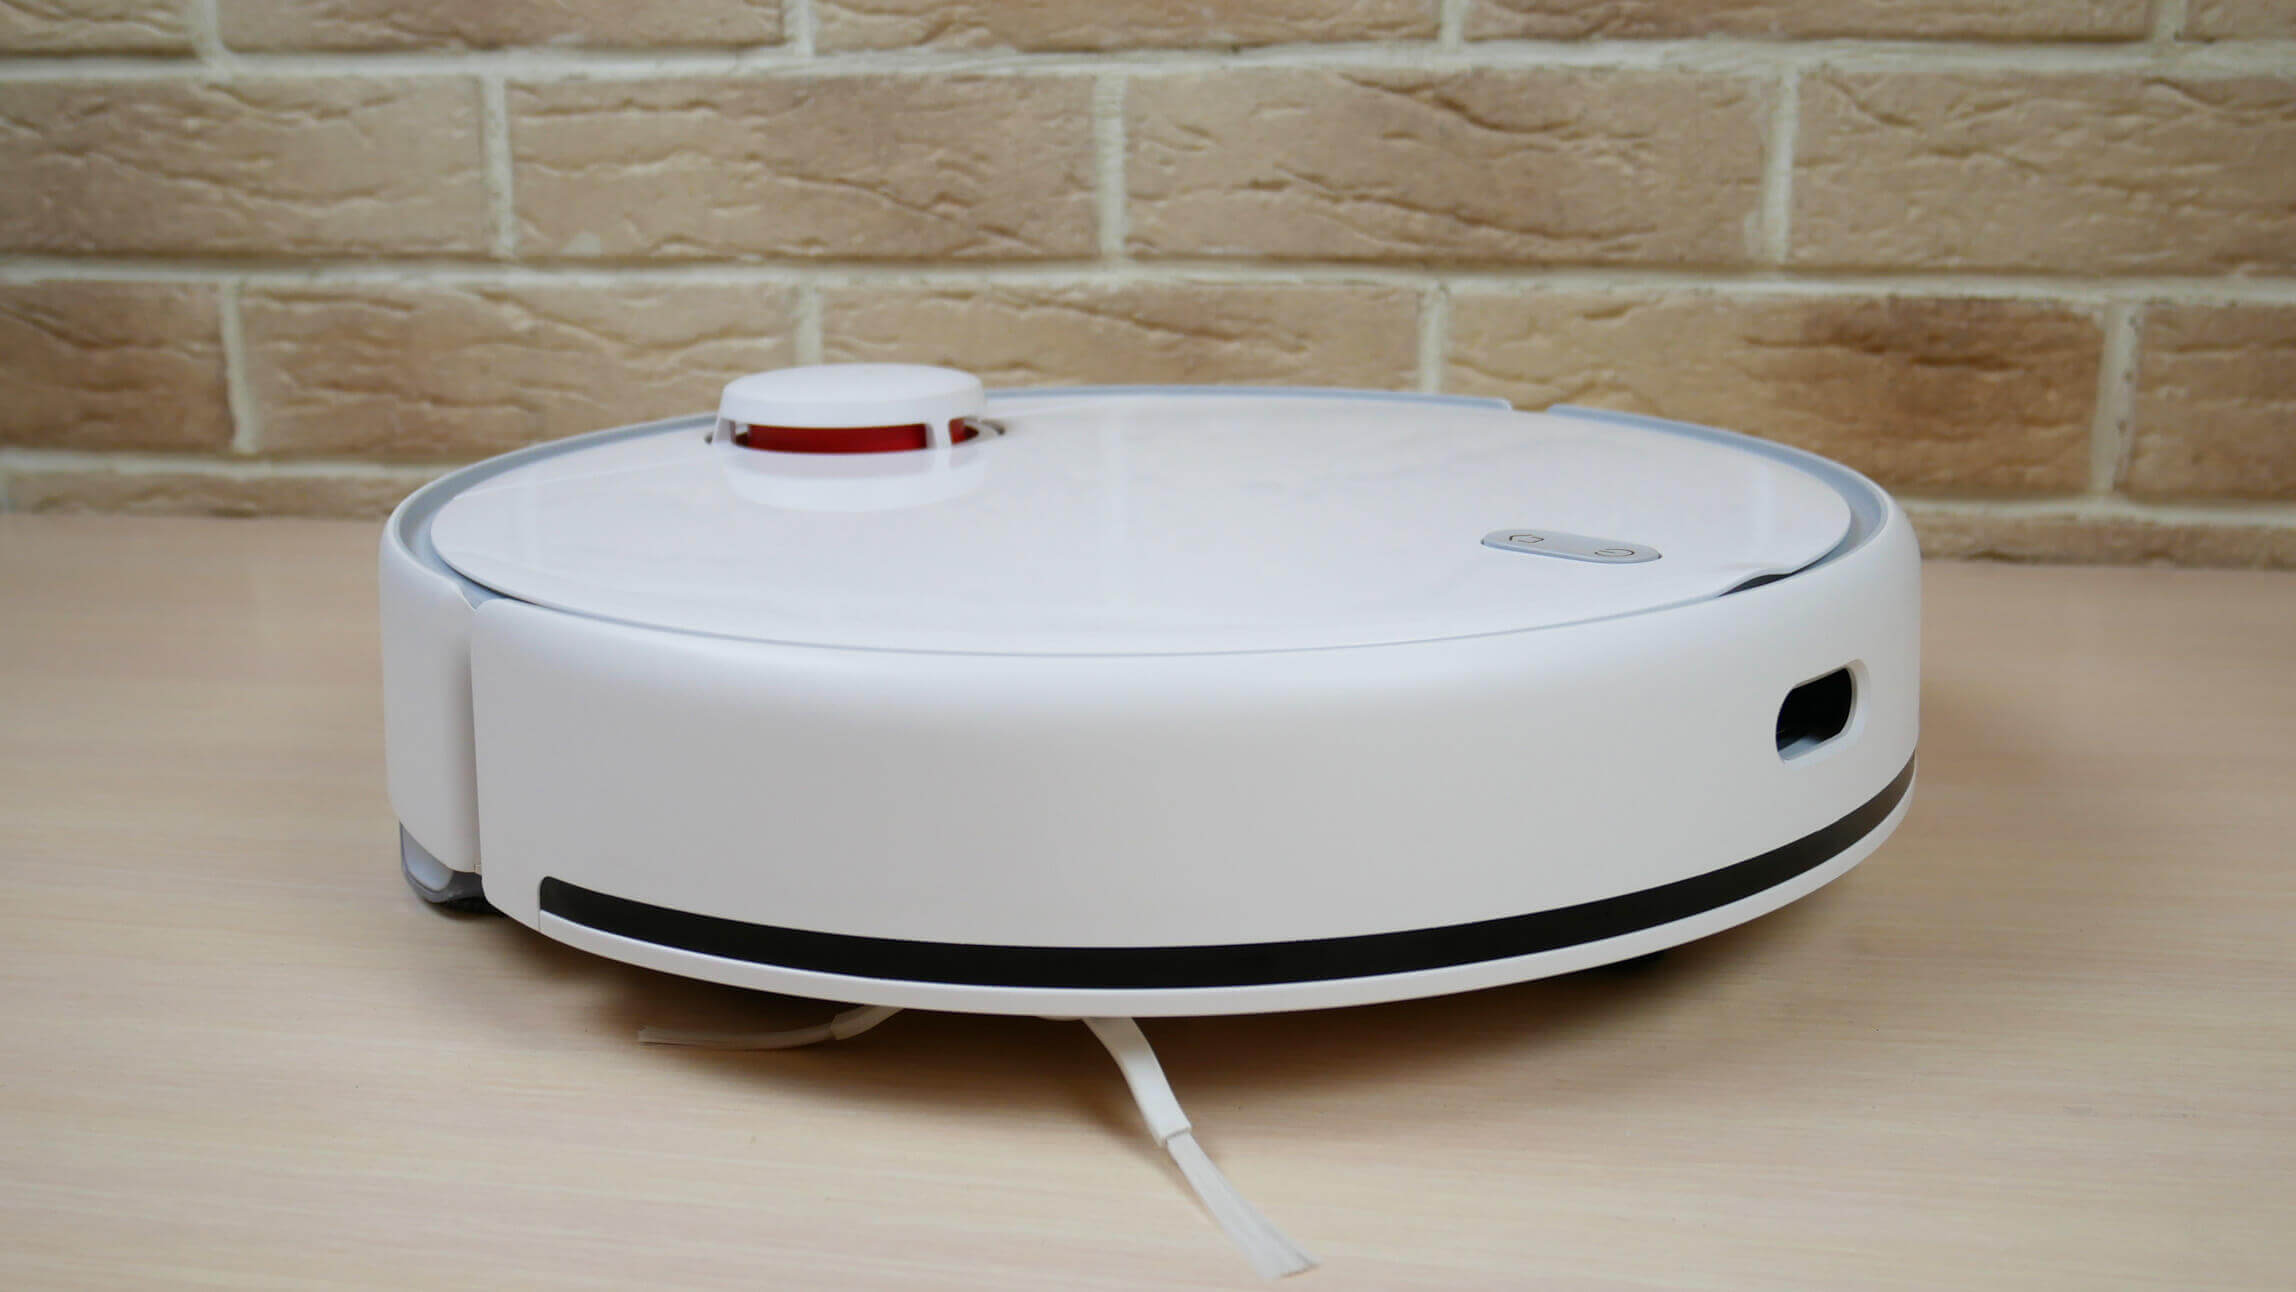 merge Make it heavy abstract Xiaomi MiJia Robot Vacuum-Mop 2 Review & Test